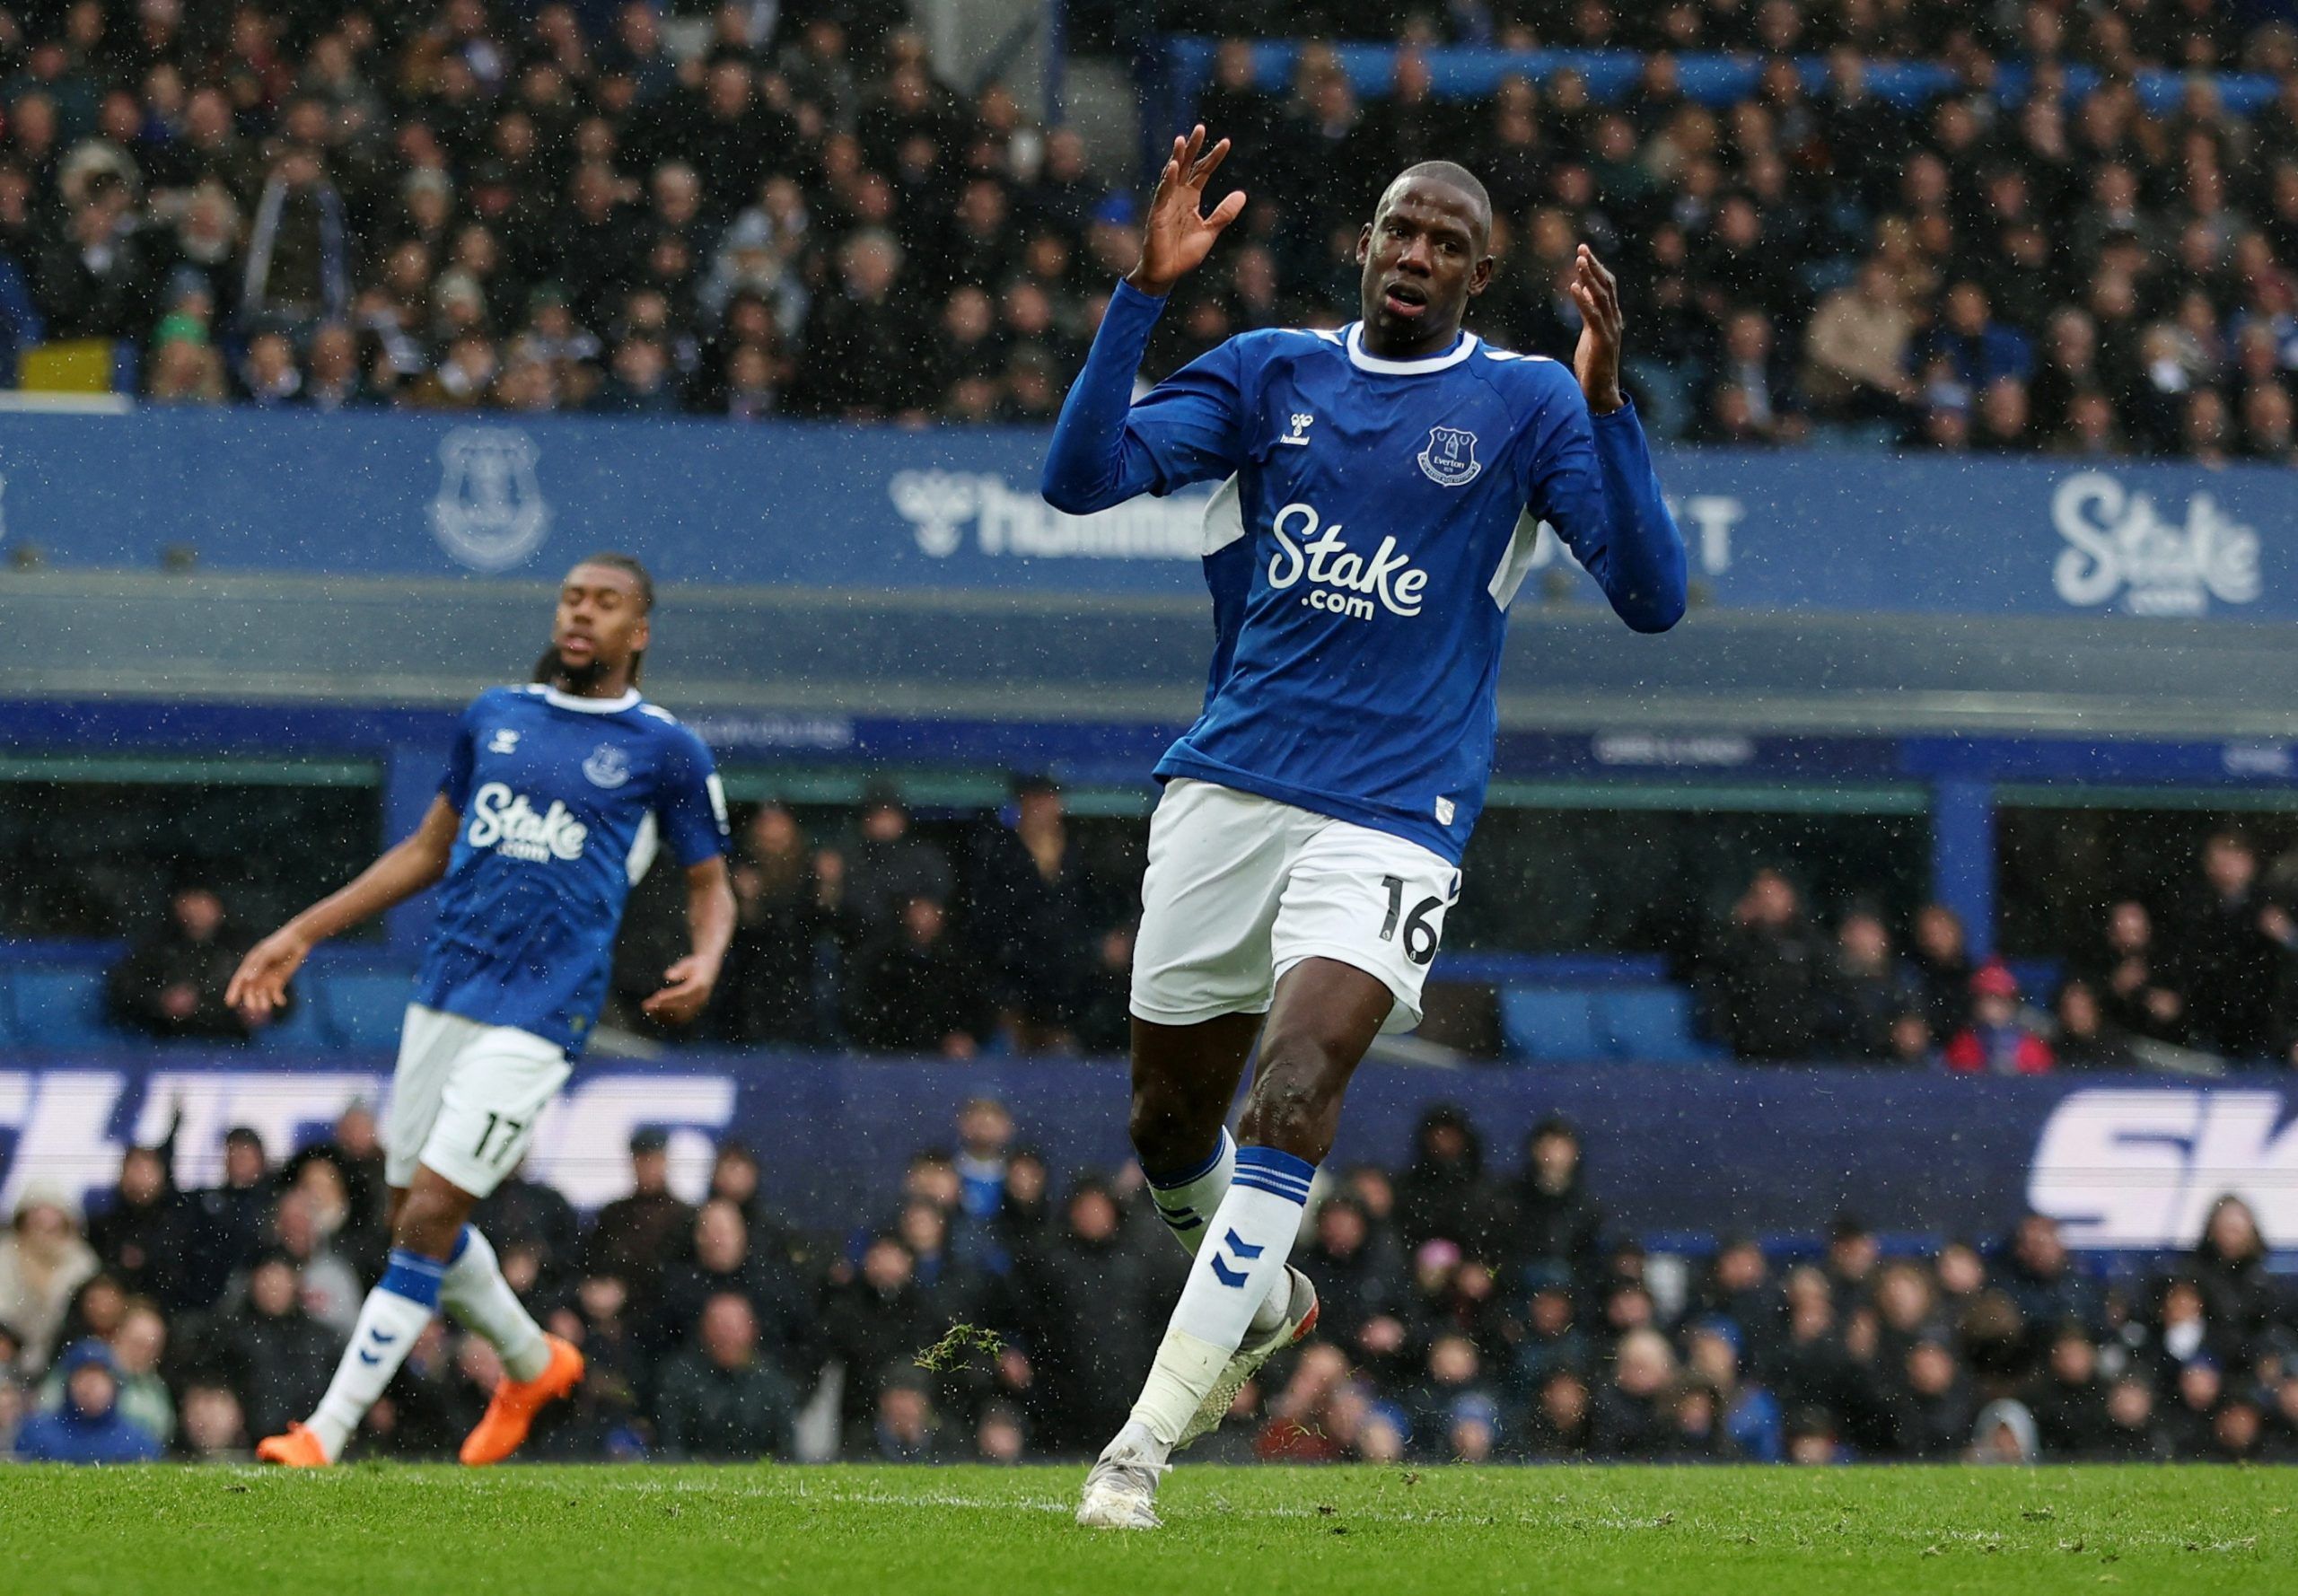 Soccer Football - Premier League - Everton v Brentford - Goodison Park, Liverpool, Britain - March 11, 2023 Everton's Abdoulaye Doucoure reacts REUTERS/Russell Cheyne EDITORIAL USE ONLY. No use with unauthorized audio, video, data, fixture lists, club/league logos or 'live' services. Online in-match use limited to 75 images, no video emulation. No use in betting, games or single club /league/player publications.  Please contact your account representative for further details.